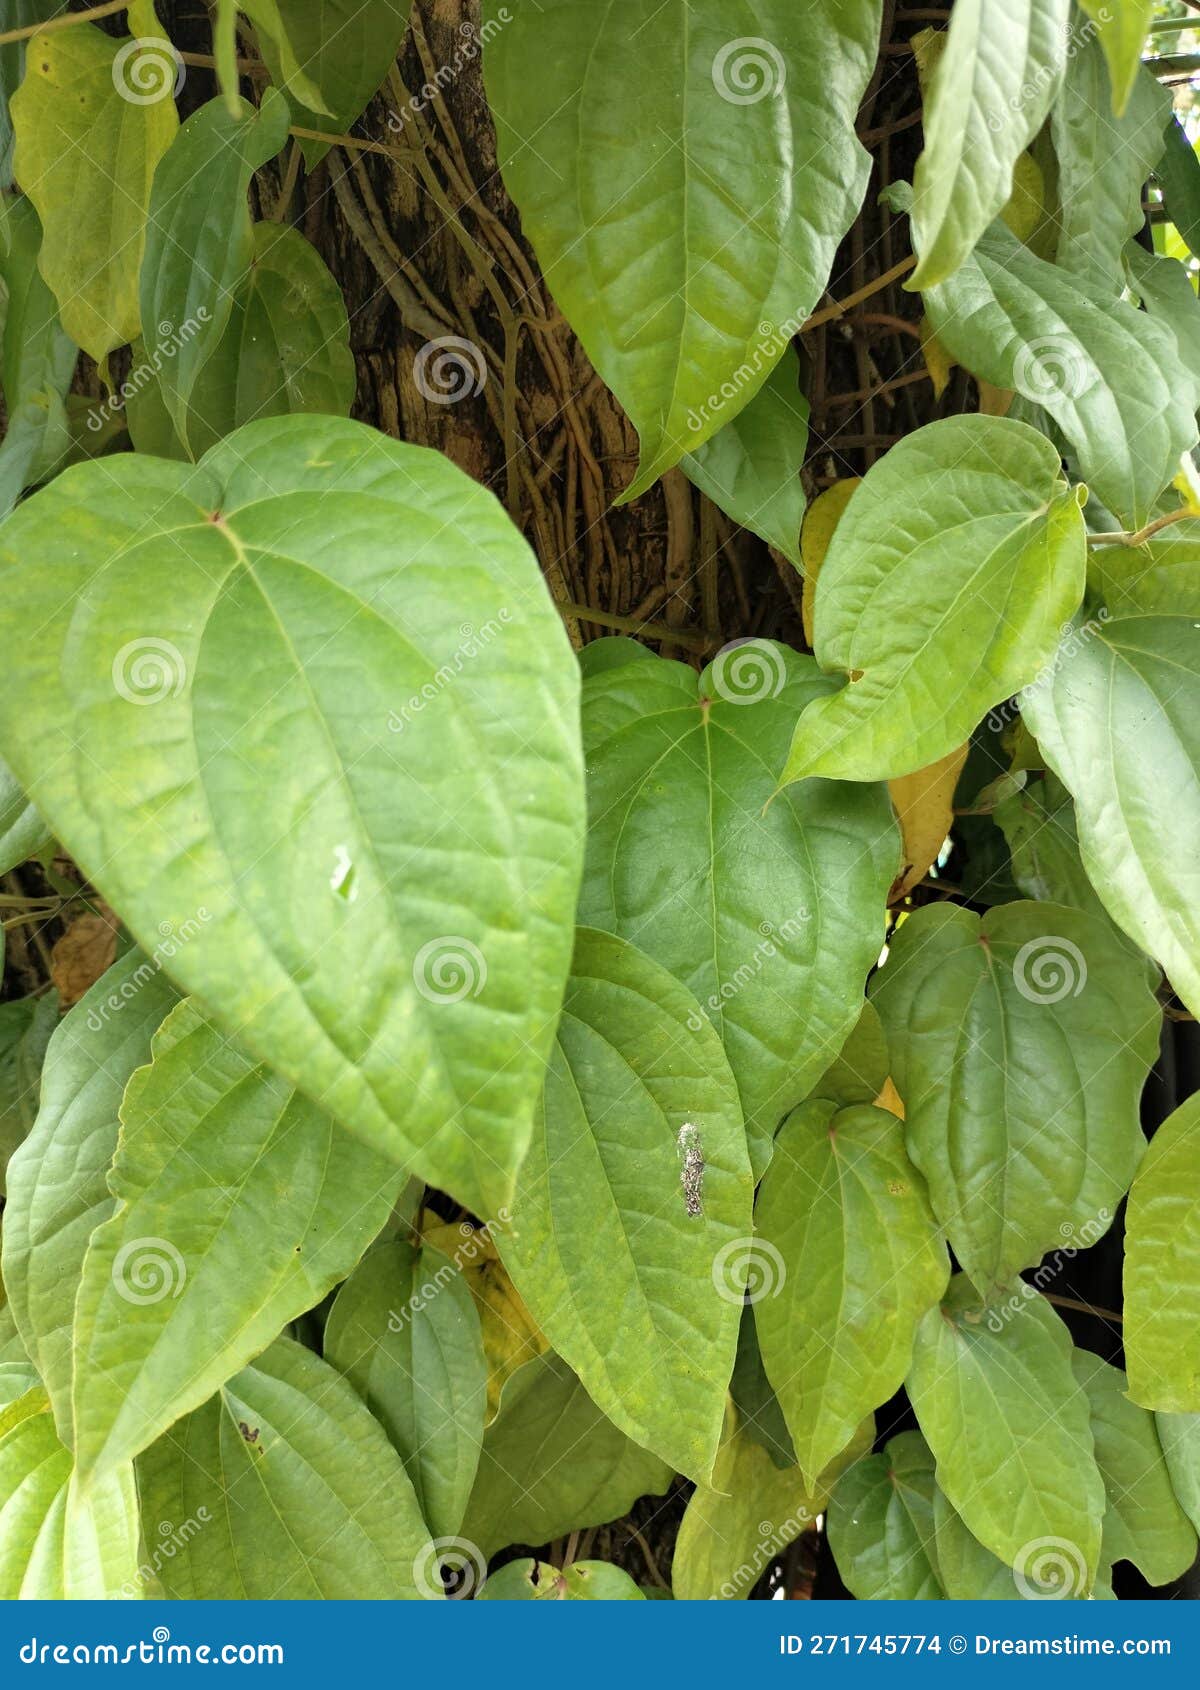 The Betel Plant is a Type of Vine that Has Many Properties, One of ...